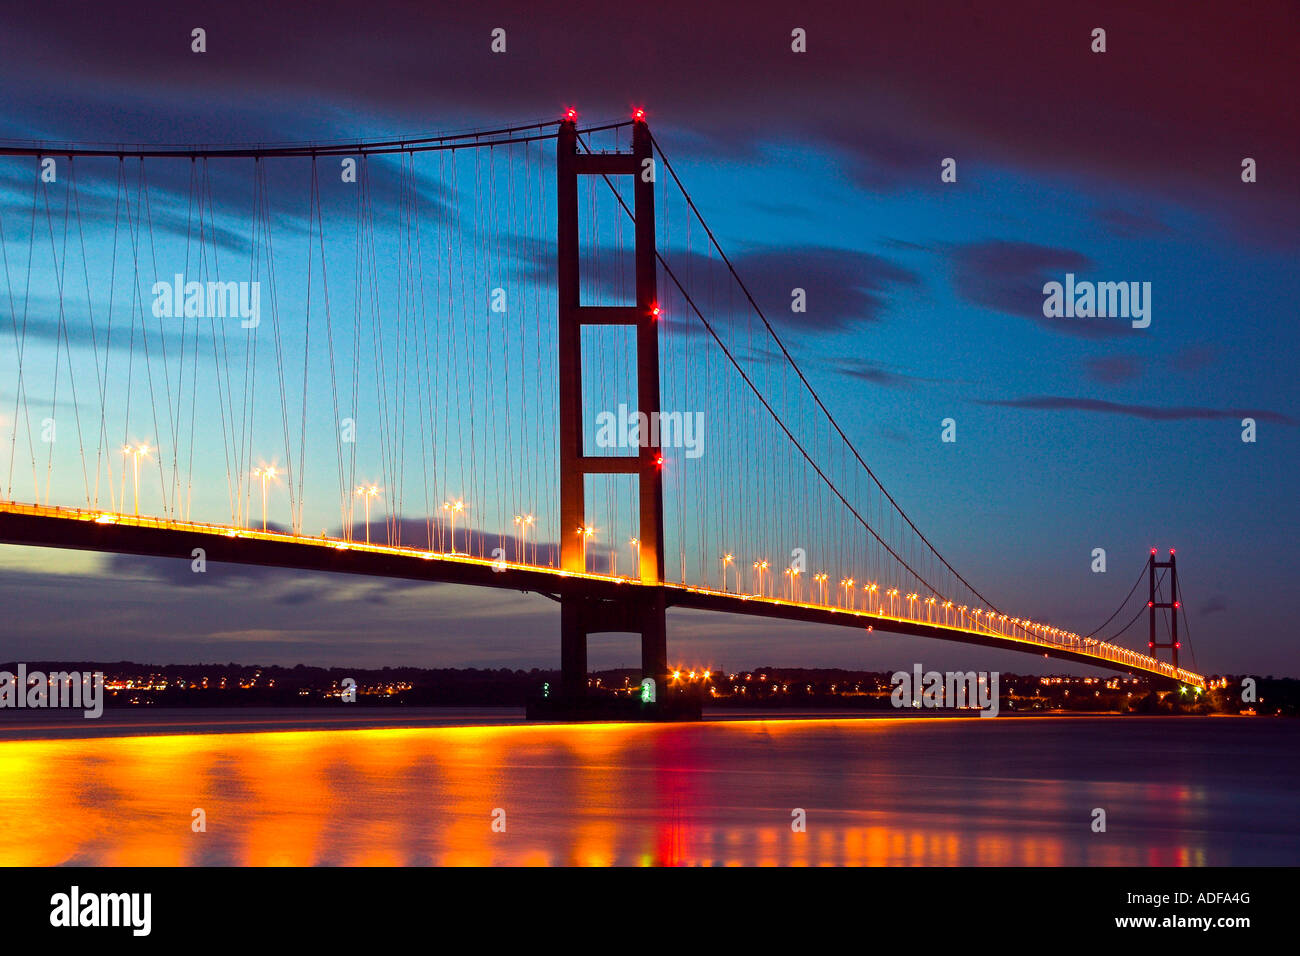 Humber Suspension Bridge in East Riding of Yorkshire, UK at night Stock Photo